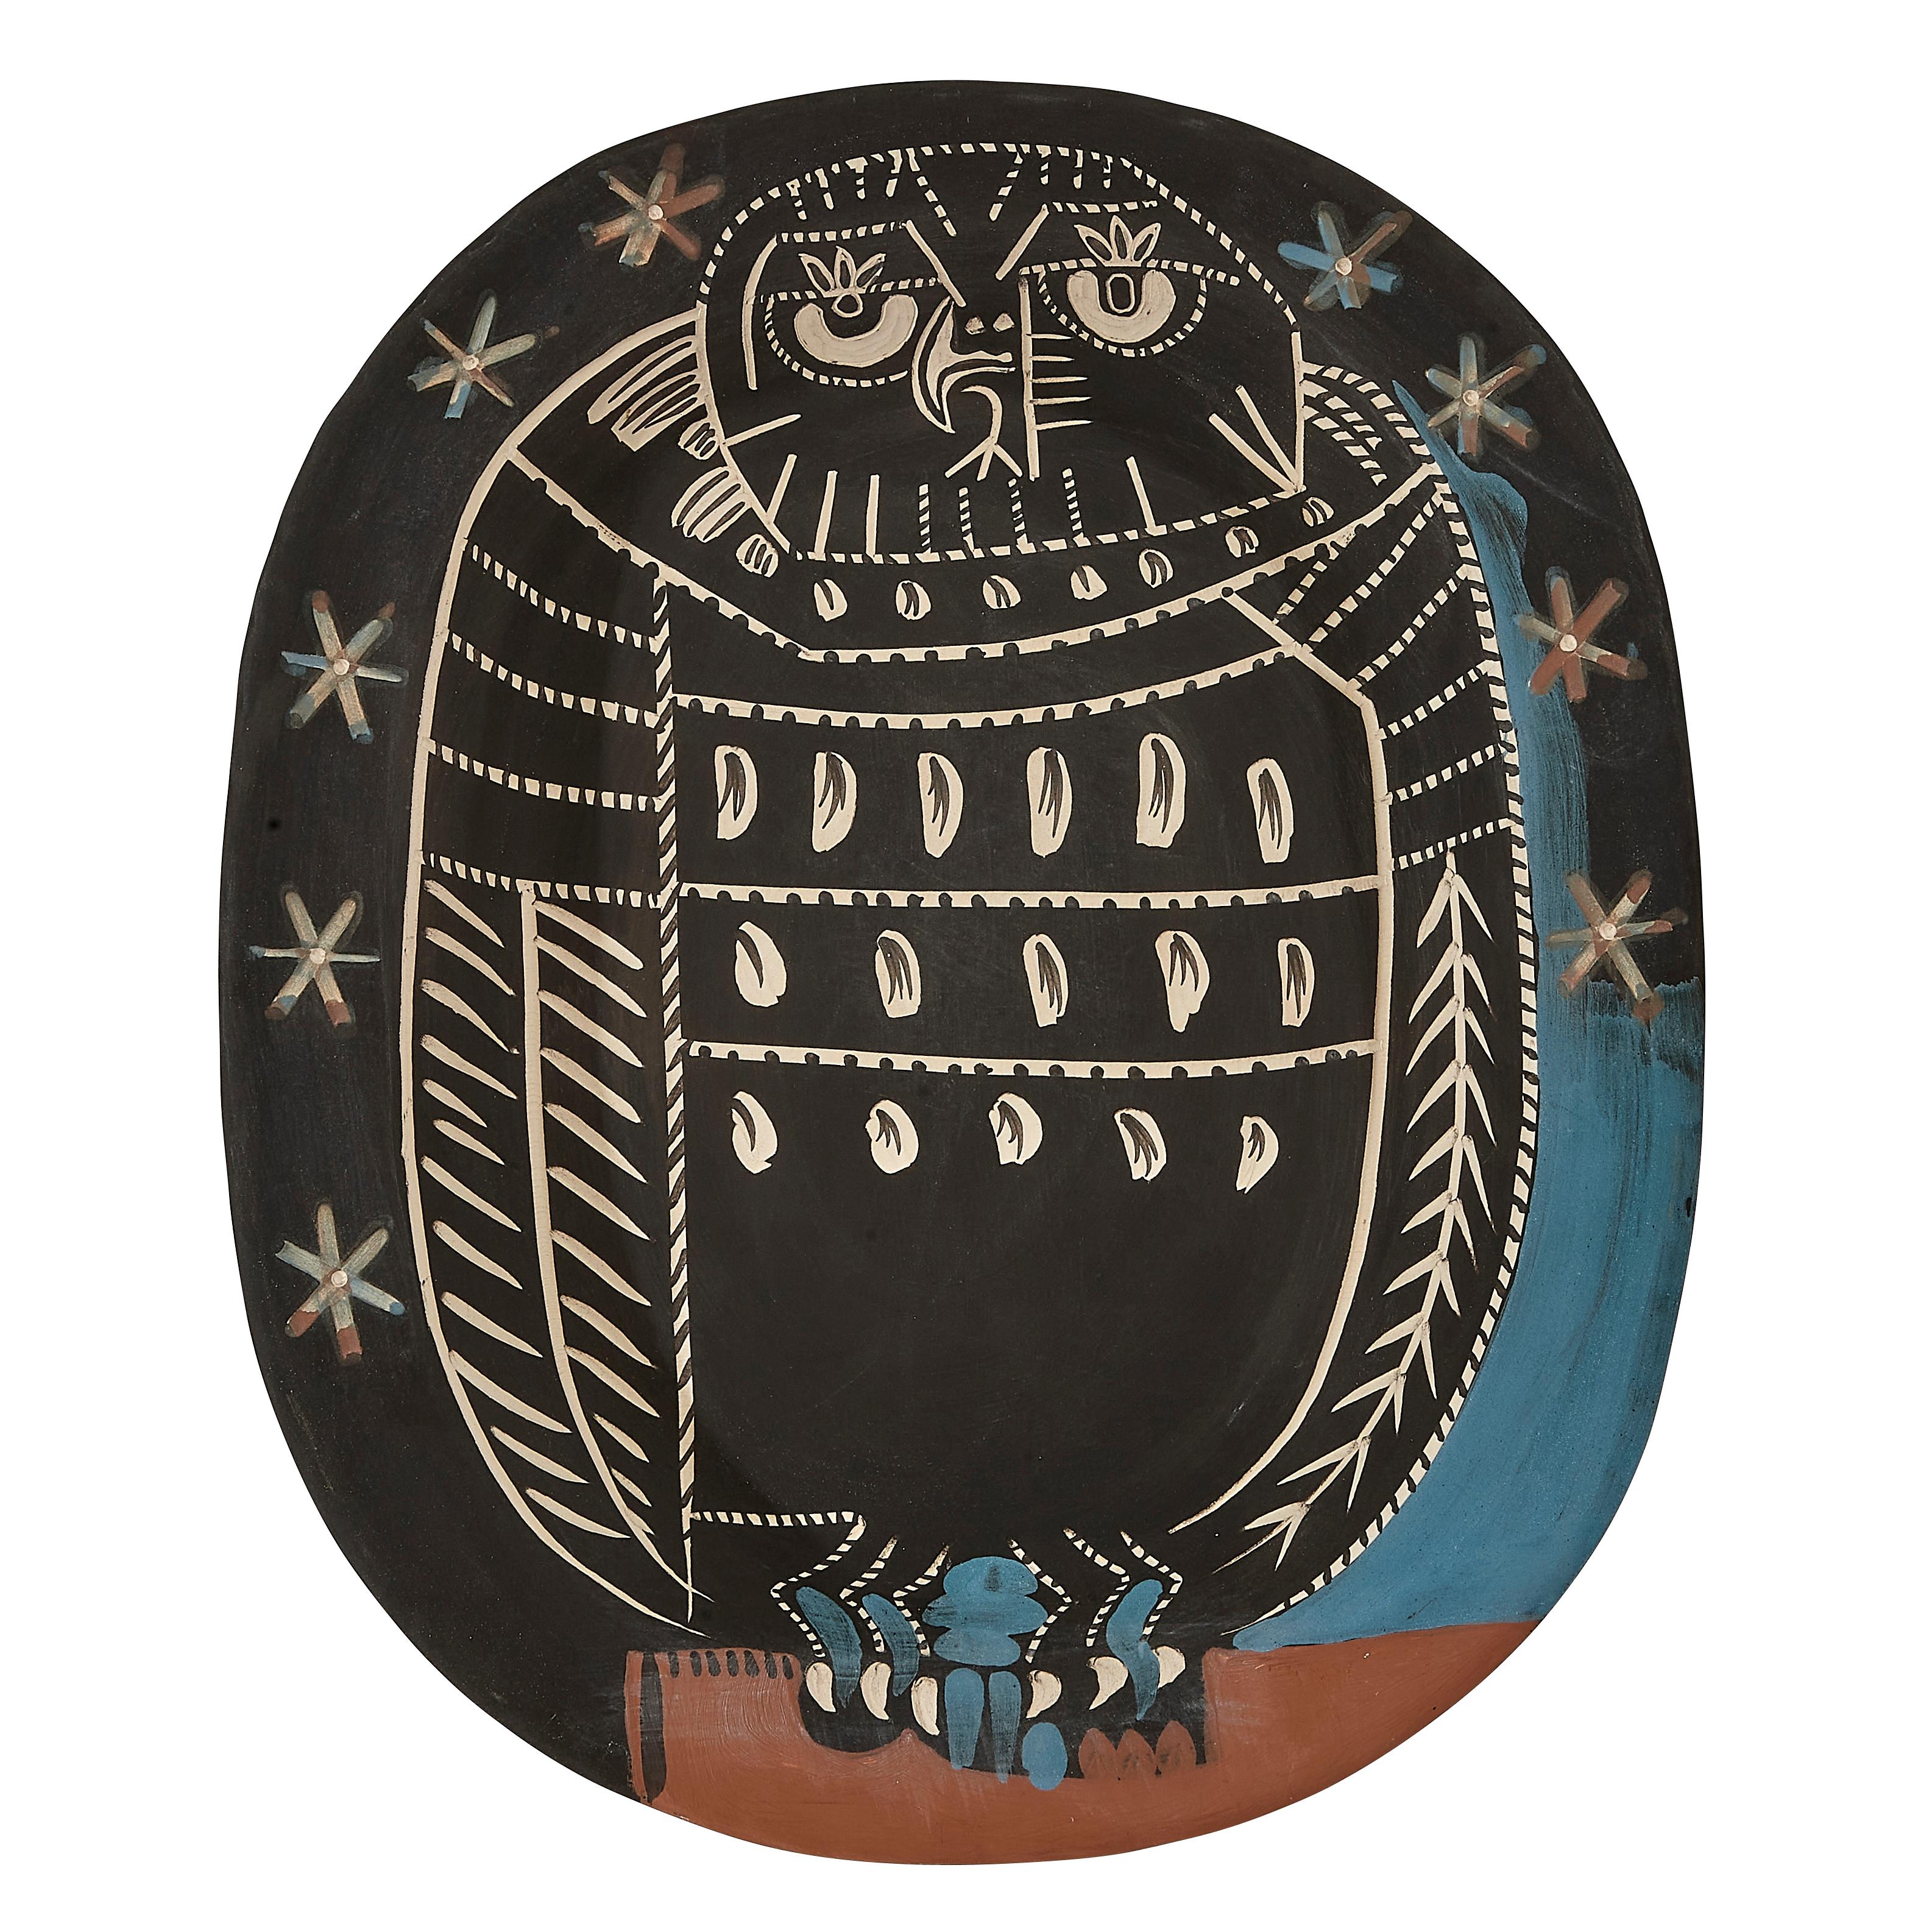 PABLO PICASSO (1881-1973) 
Hibou Mat (A. R. 284) 

Terre de faïence plate, painted in colors and partially glazed, 1955, from the edition of 450, with the Edition Picasso and Madoura stamps.